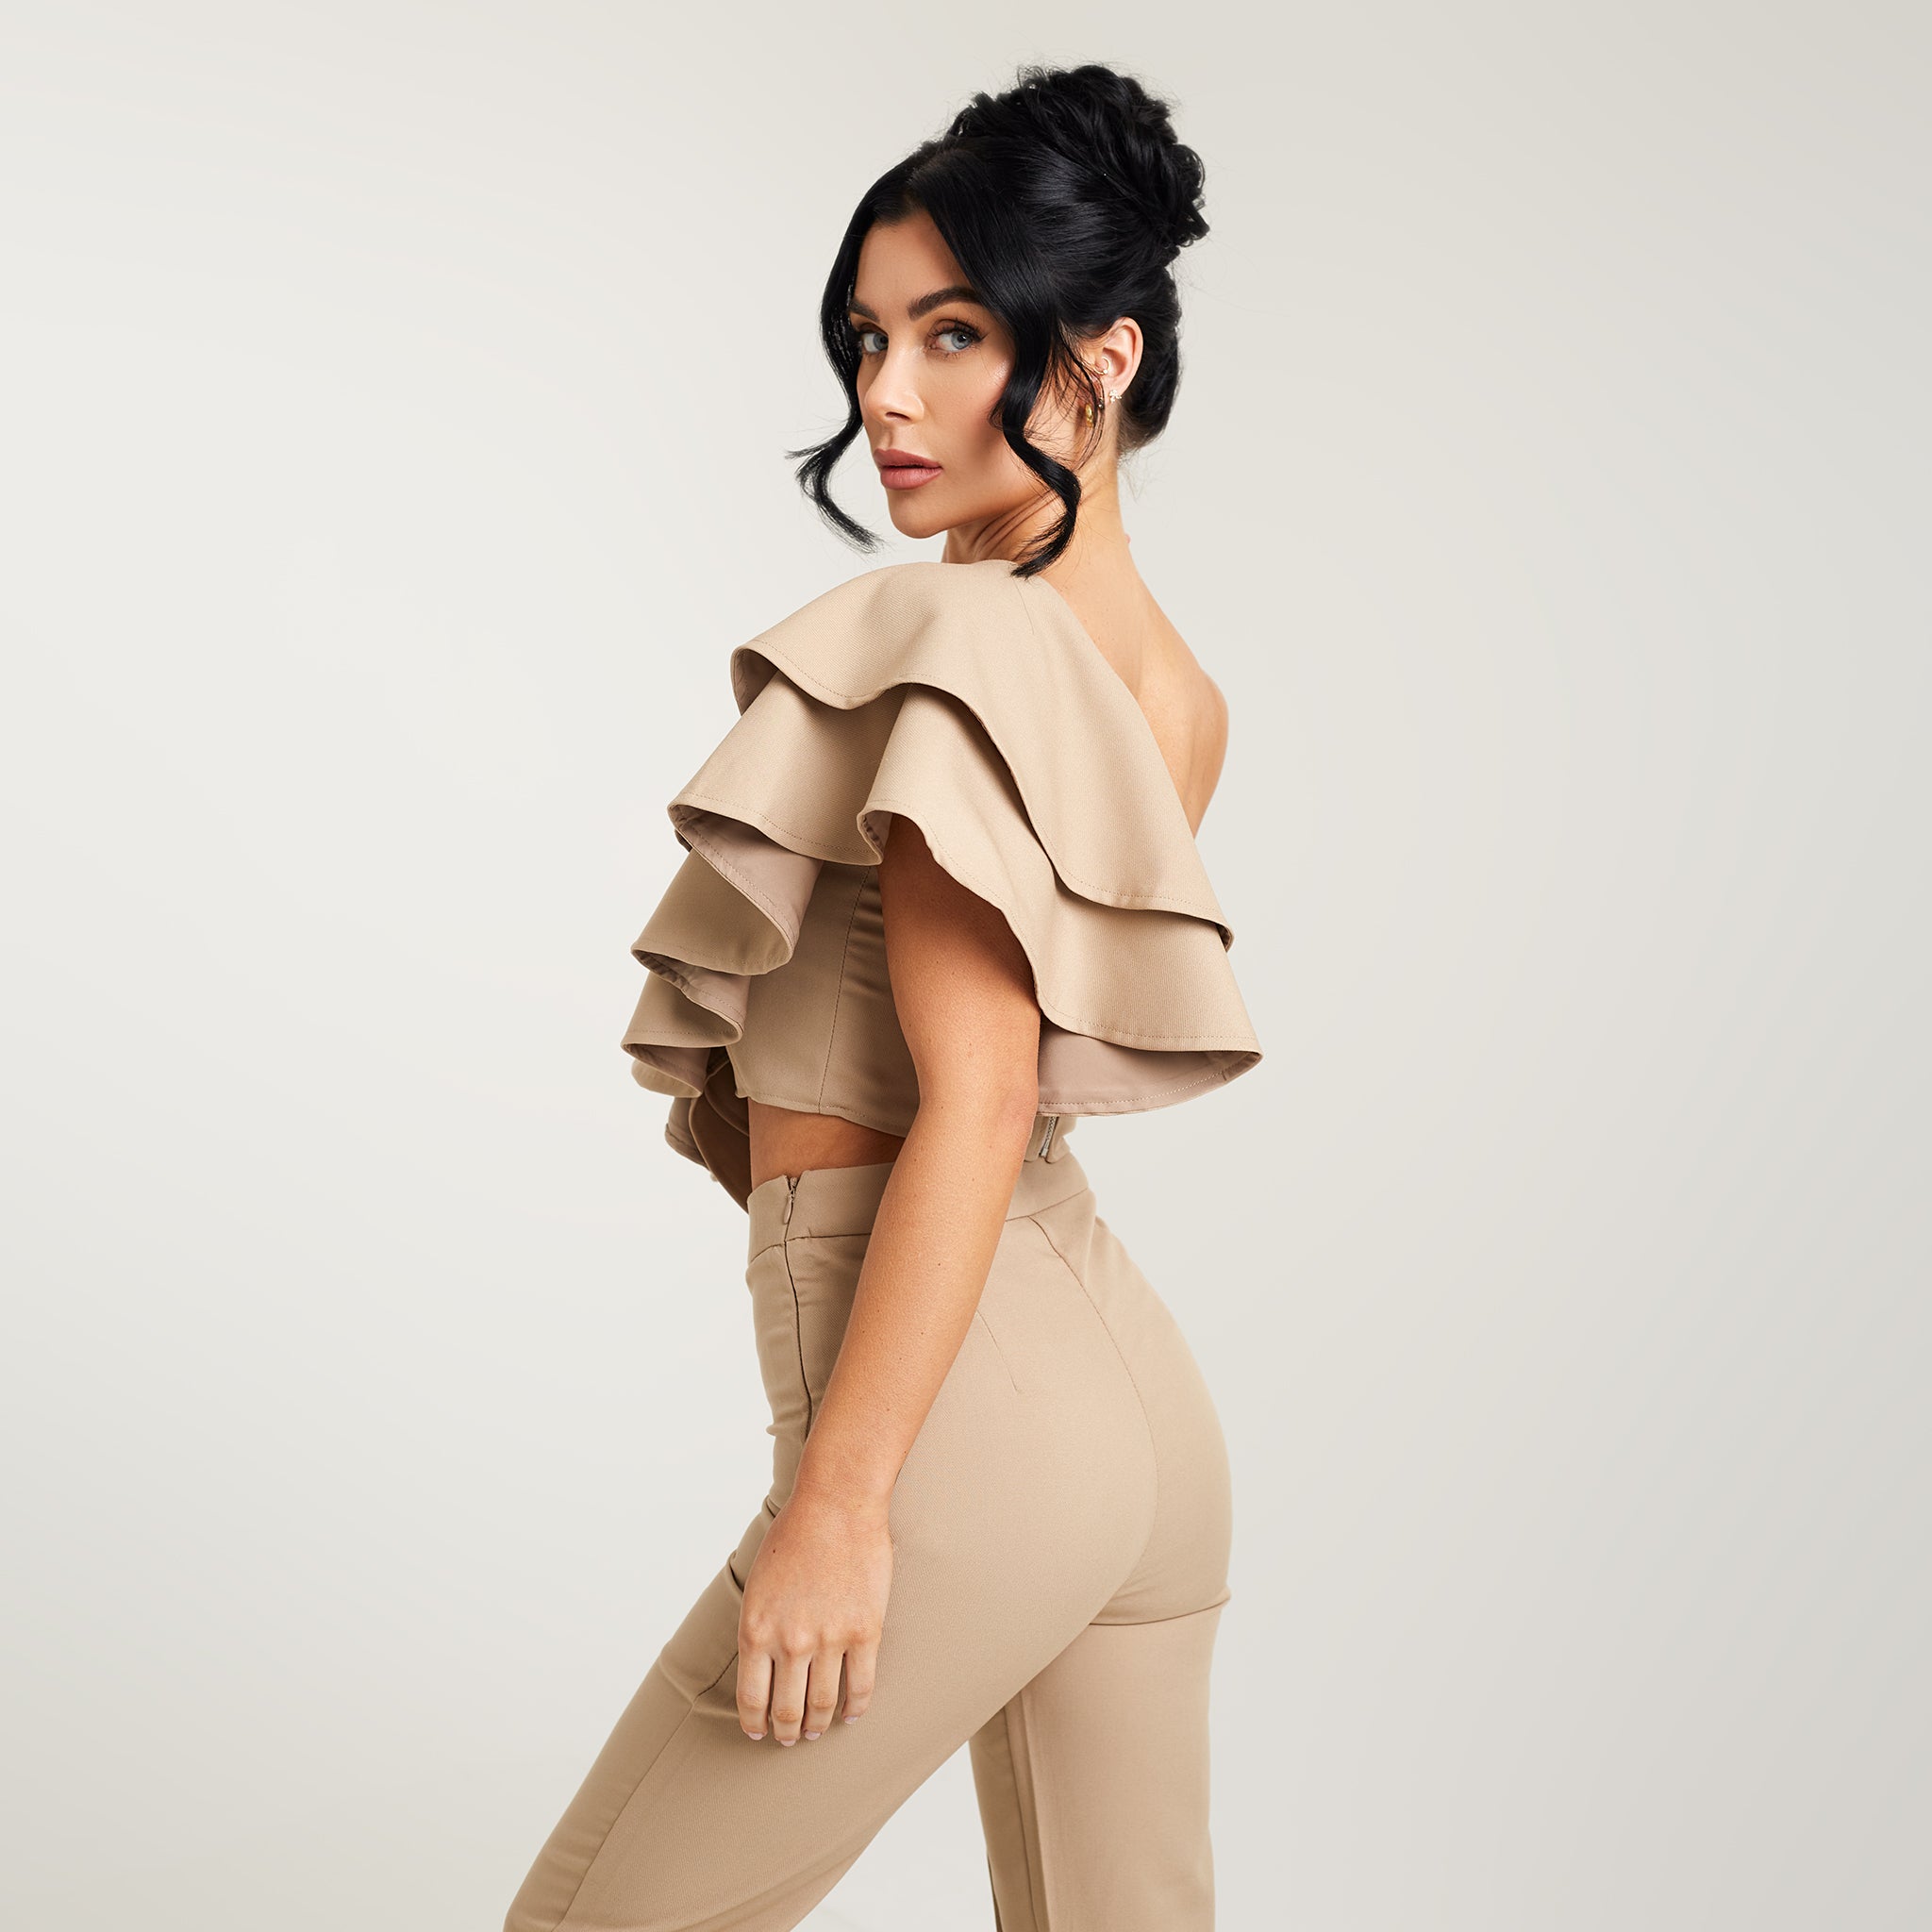 Cally Jane Beech, a woman with her hair styled up, models a beige one-shoulder ruffle cropped top. The top features a single shoulder strap, creating an asymmetrical neckline, while the ruffle detail delicately adorns the shoulder and extends down to the cropped hemline. The beige color adds a soft and neutral tone to the ensemble, offering versatility for various outfits.